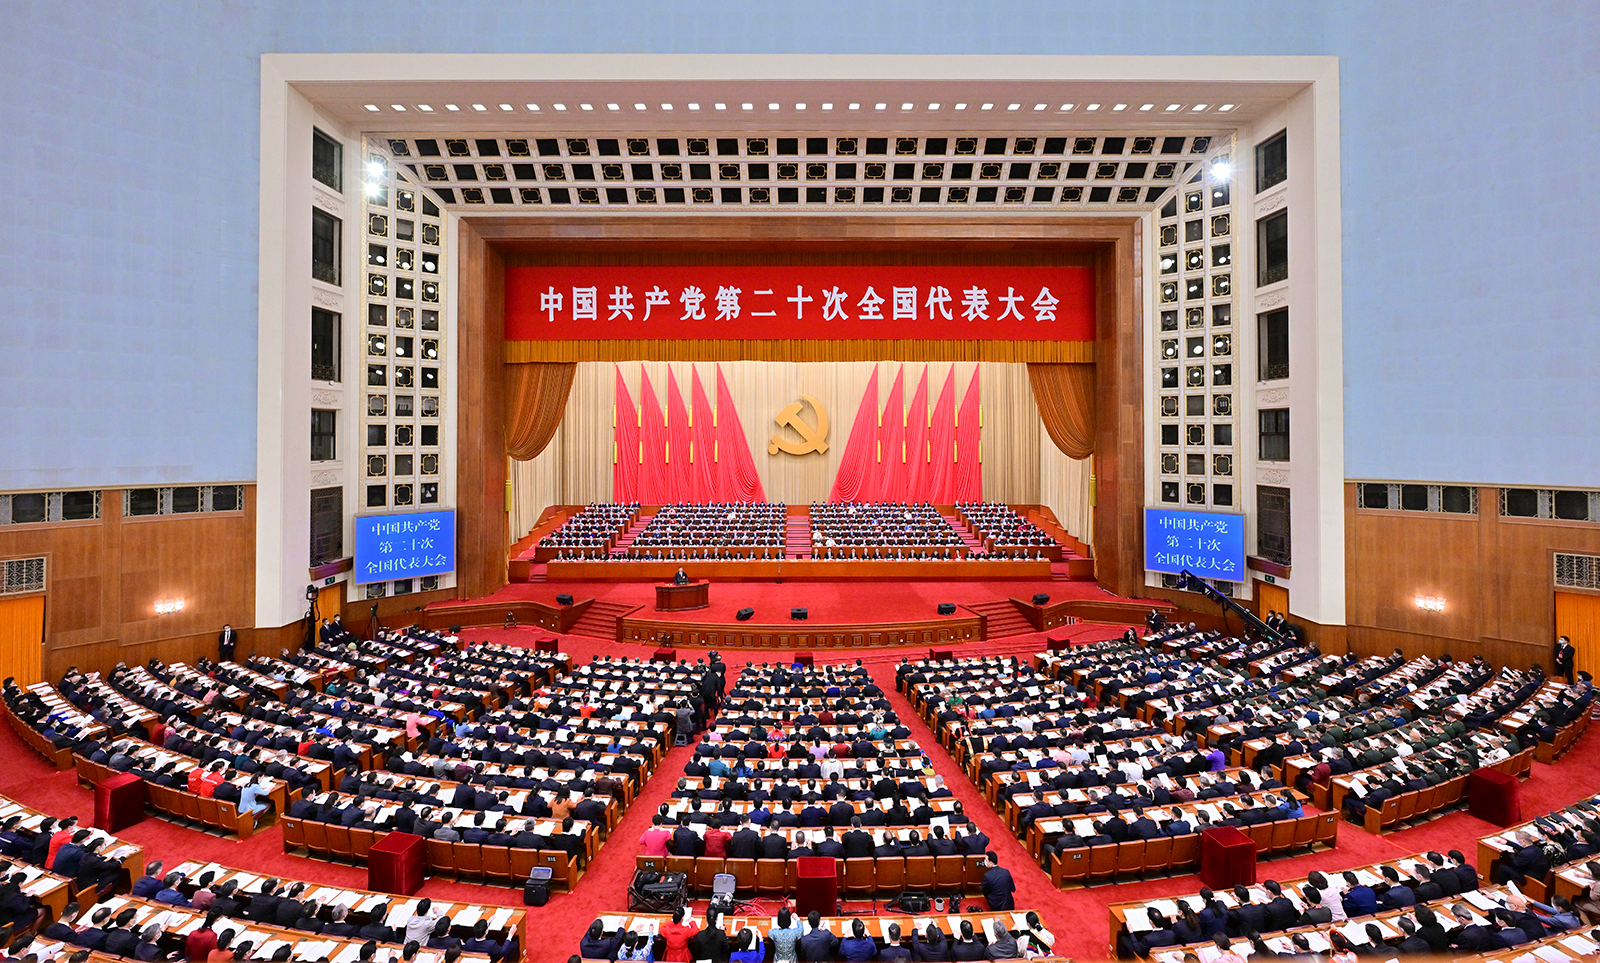 The 20th National Congress of the Communist Party of China (CPC) opens at the Great Hall of the People in Beijing on October 16.